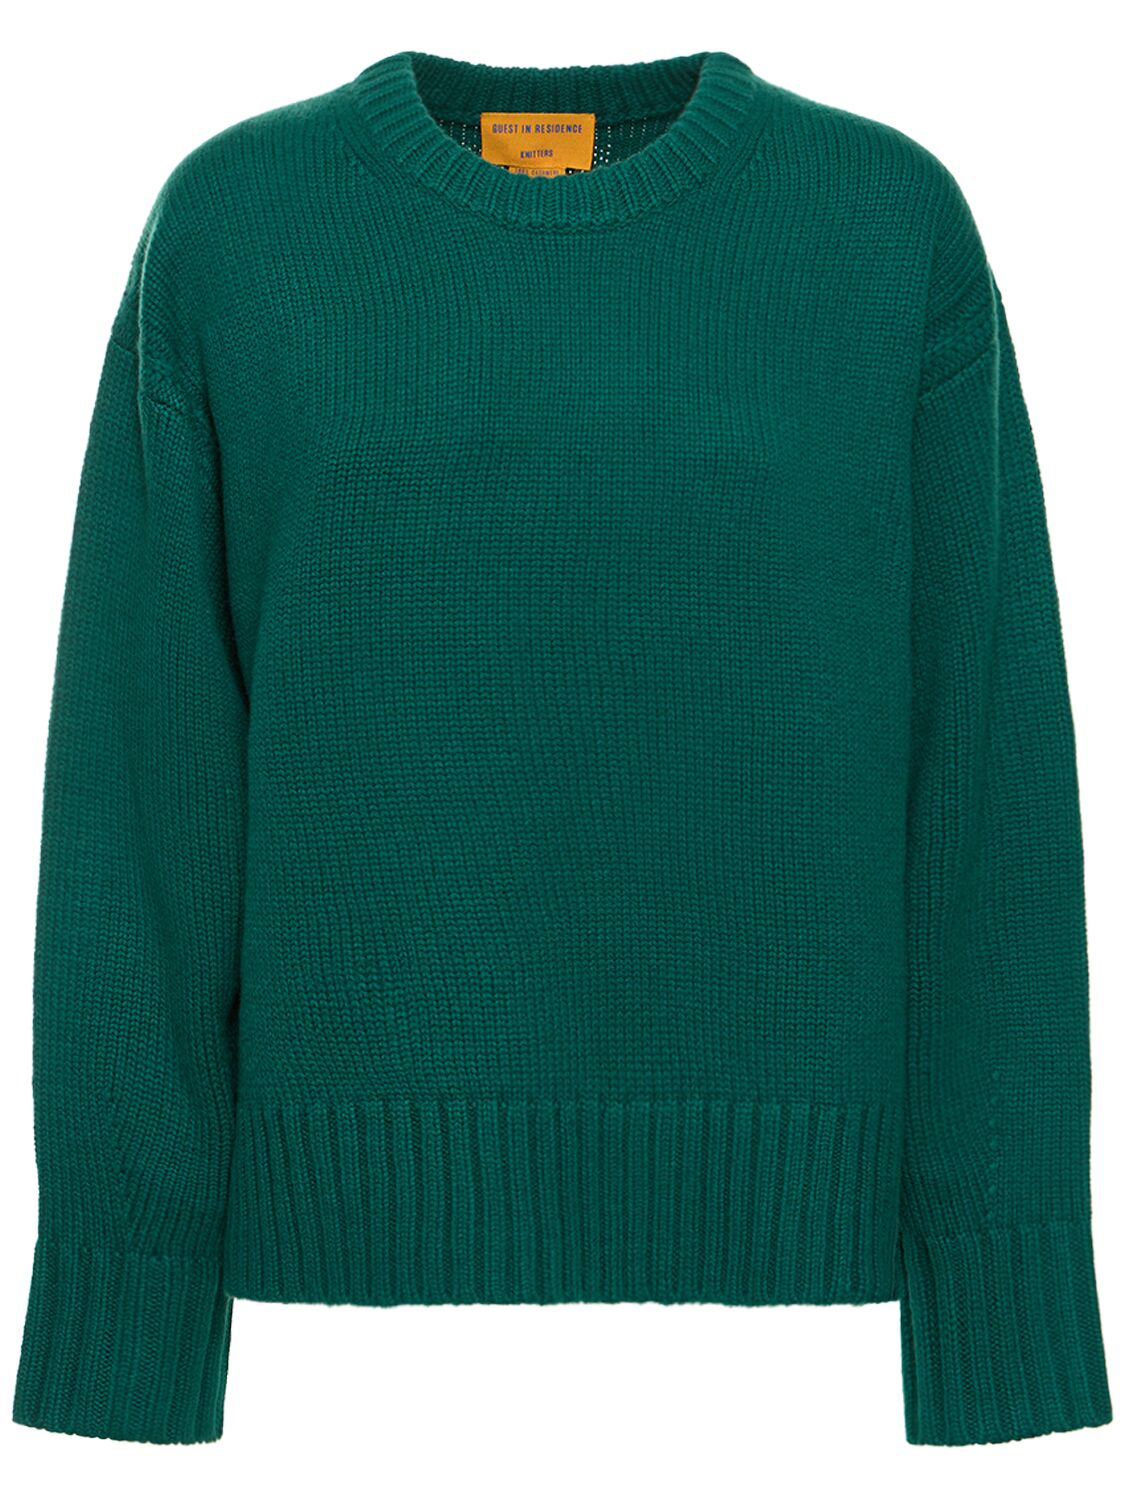 Image of Cozy Cashmere Knit Crew Sweater